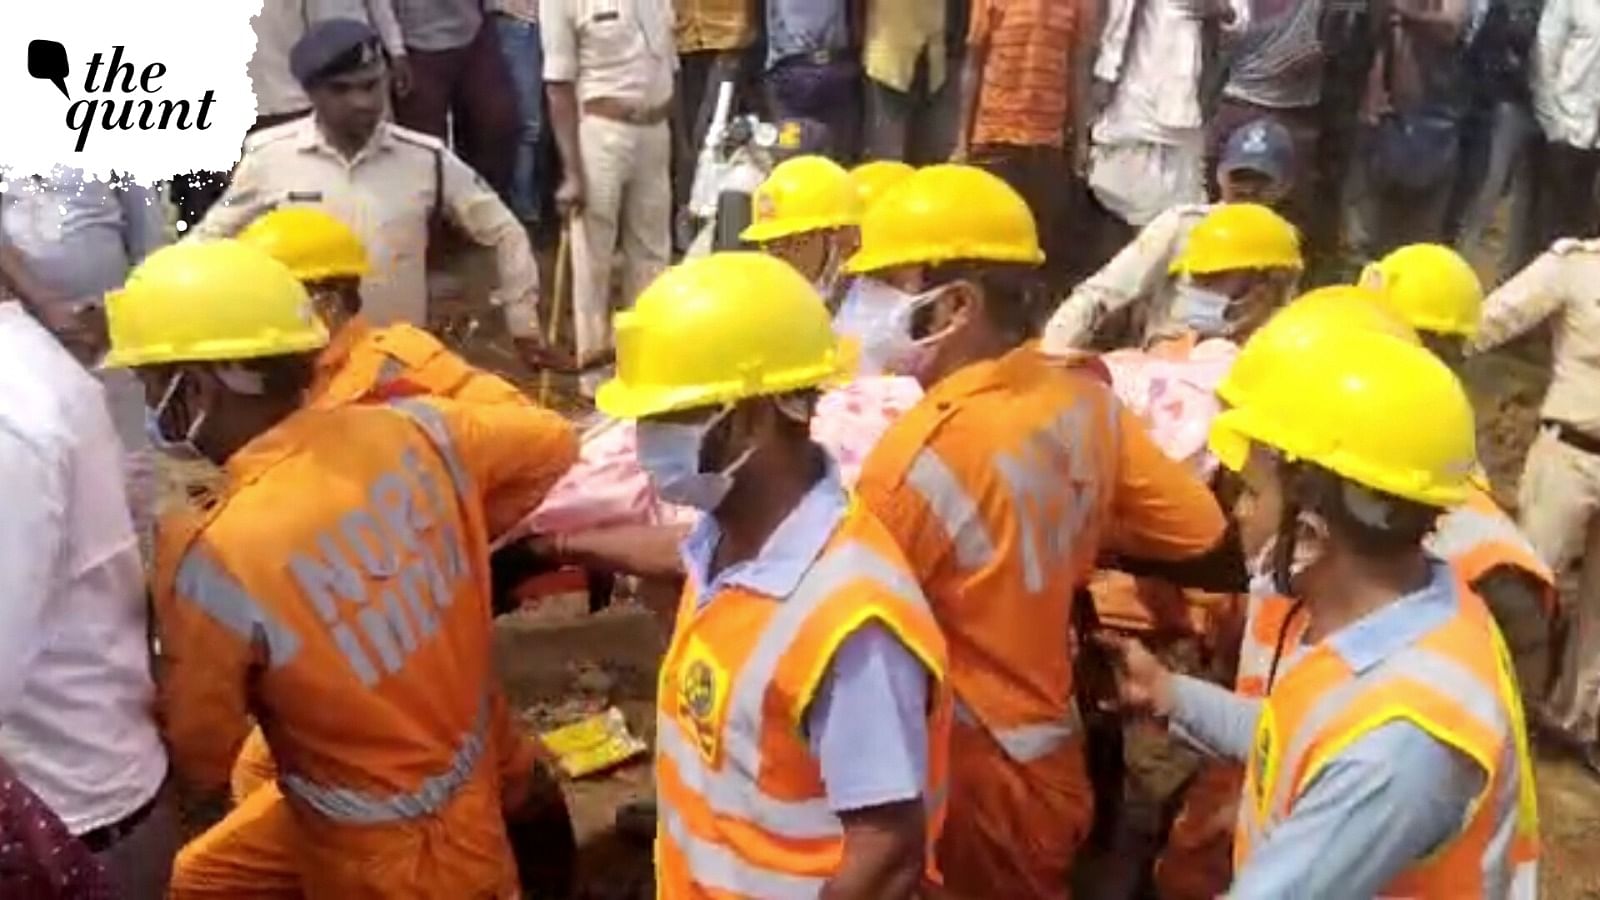 <div class="paragraphs"><p>An eight-year-old boy named <a href="https://www.thequint.com/news/india/fiver-year-old-boy-stuck-in-borewell-in-mp-rescue-operations-on">Lokesh Ahirwar</a> died after falling into a 60-foot open borewell in <a href="https://www.thequint.com/news/india/man-dies-by-suicide-chained-to-tree-thrashed-son-eloped-with-woman-madhya-pradesh">Madhya Pradesh's</a> Vidisha district on Tuesday, 14 March. His body was recovered after a rescue operation that lasted for nearly 24 hours.</p></div>